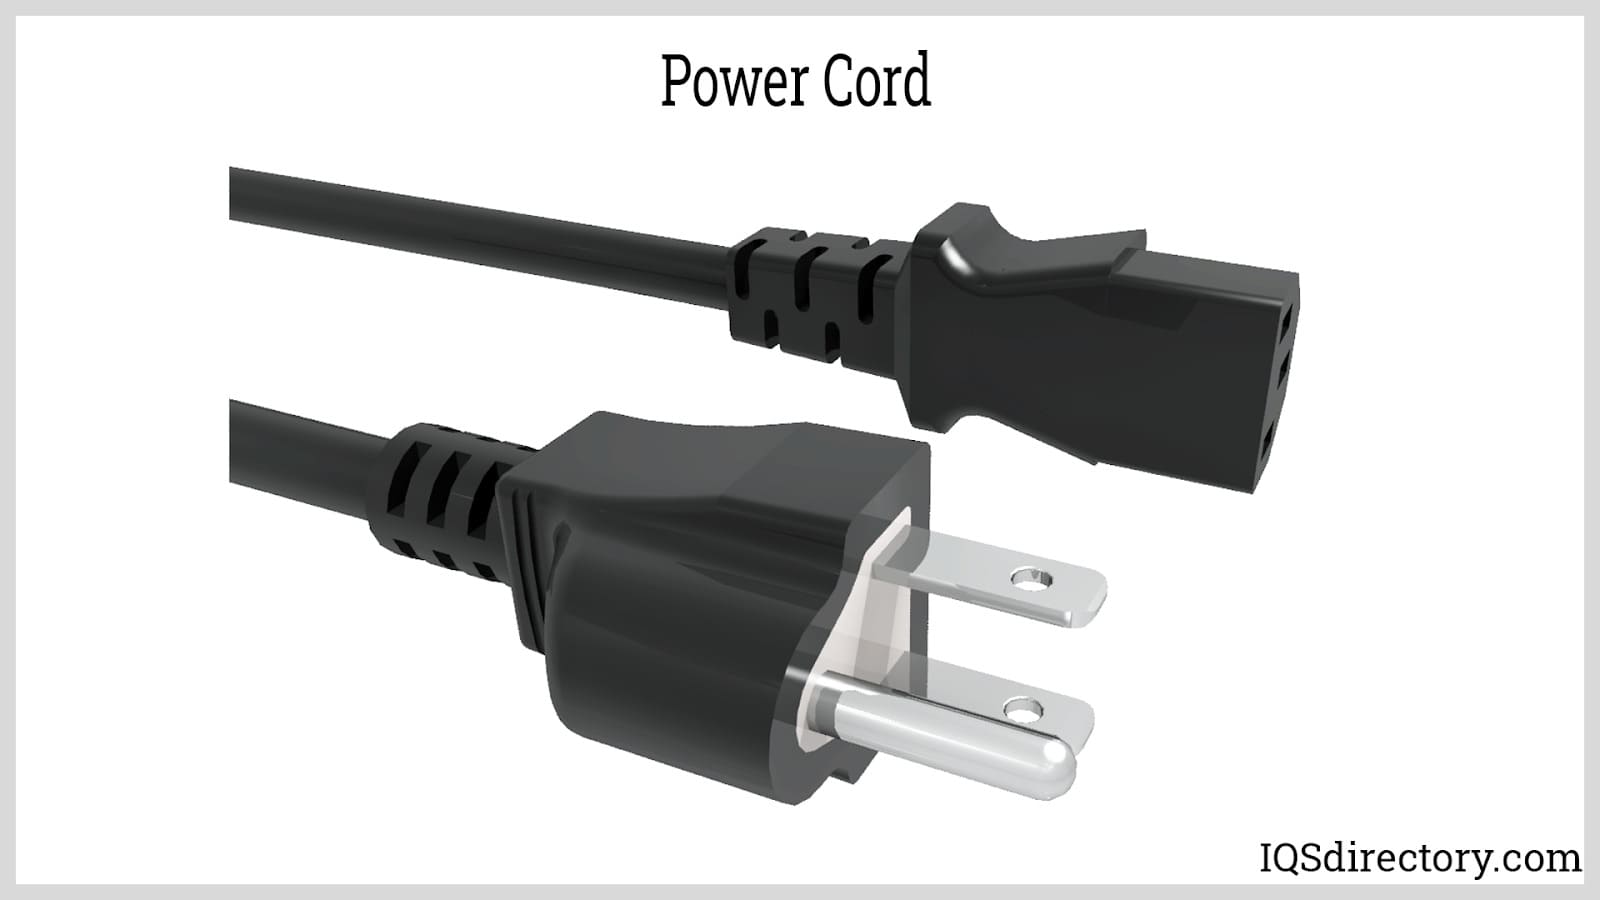 Power Cord: What Is It? How Is It Used? Types, Standards